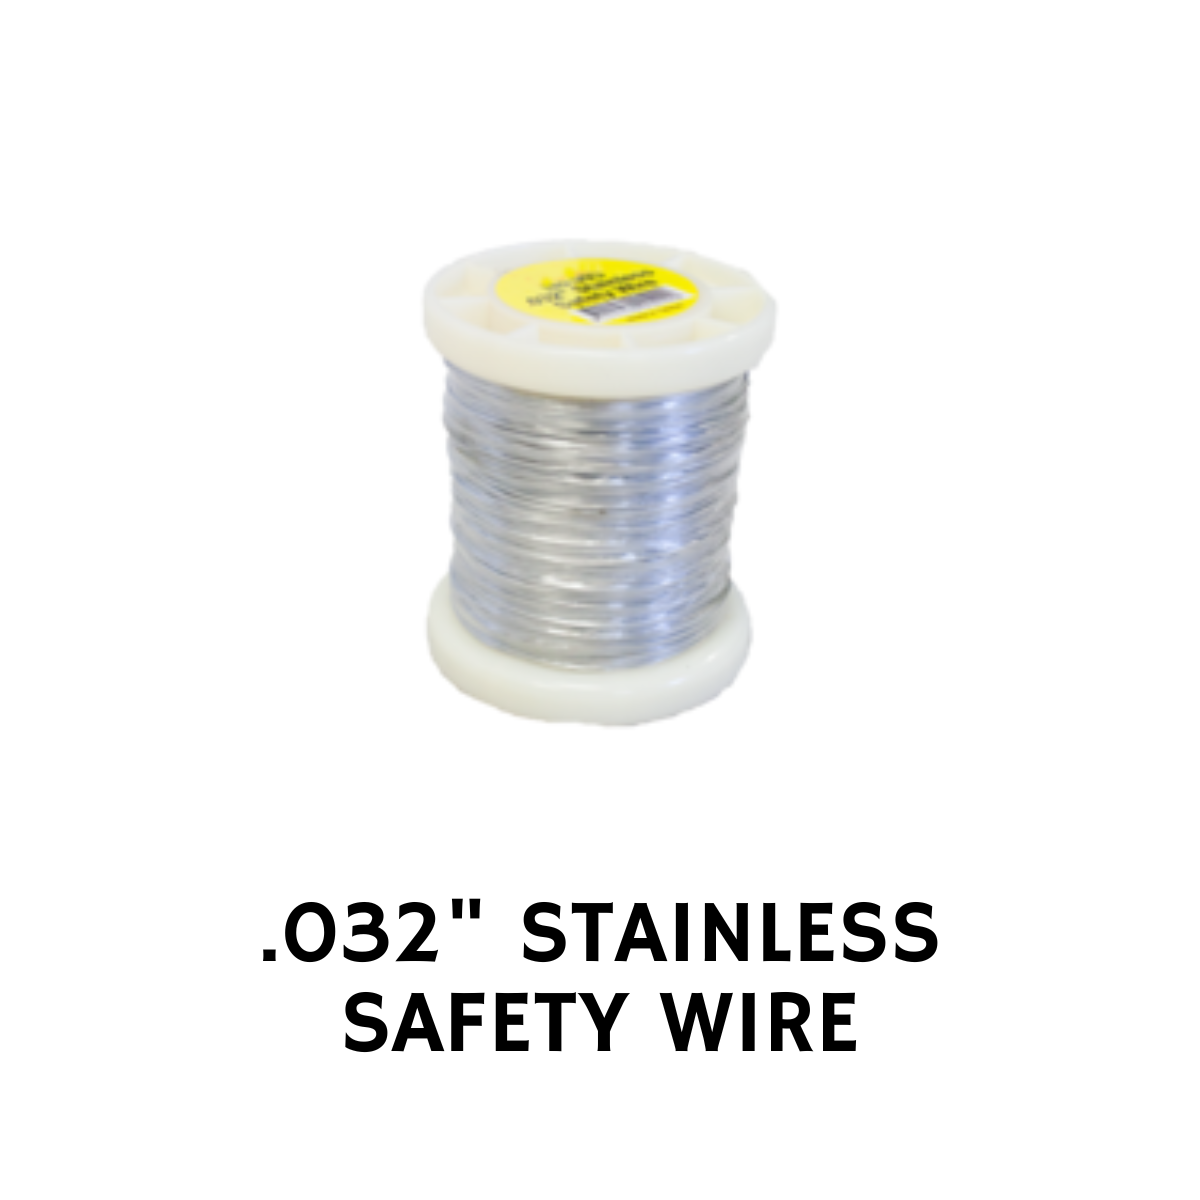 .O32" STAINLESS SAFETY WIRE